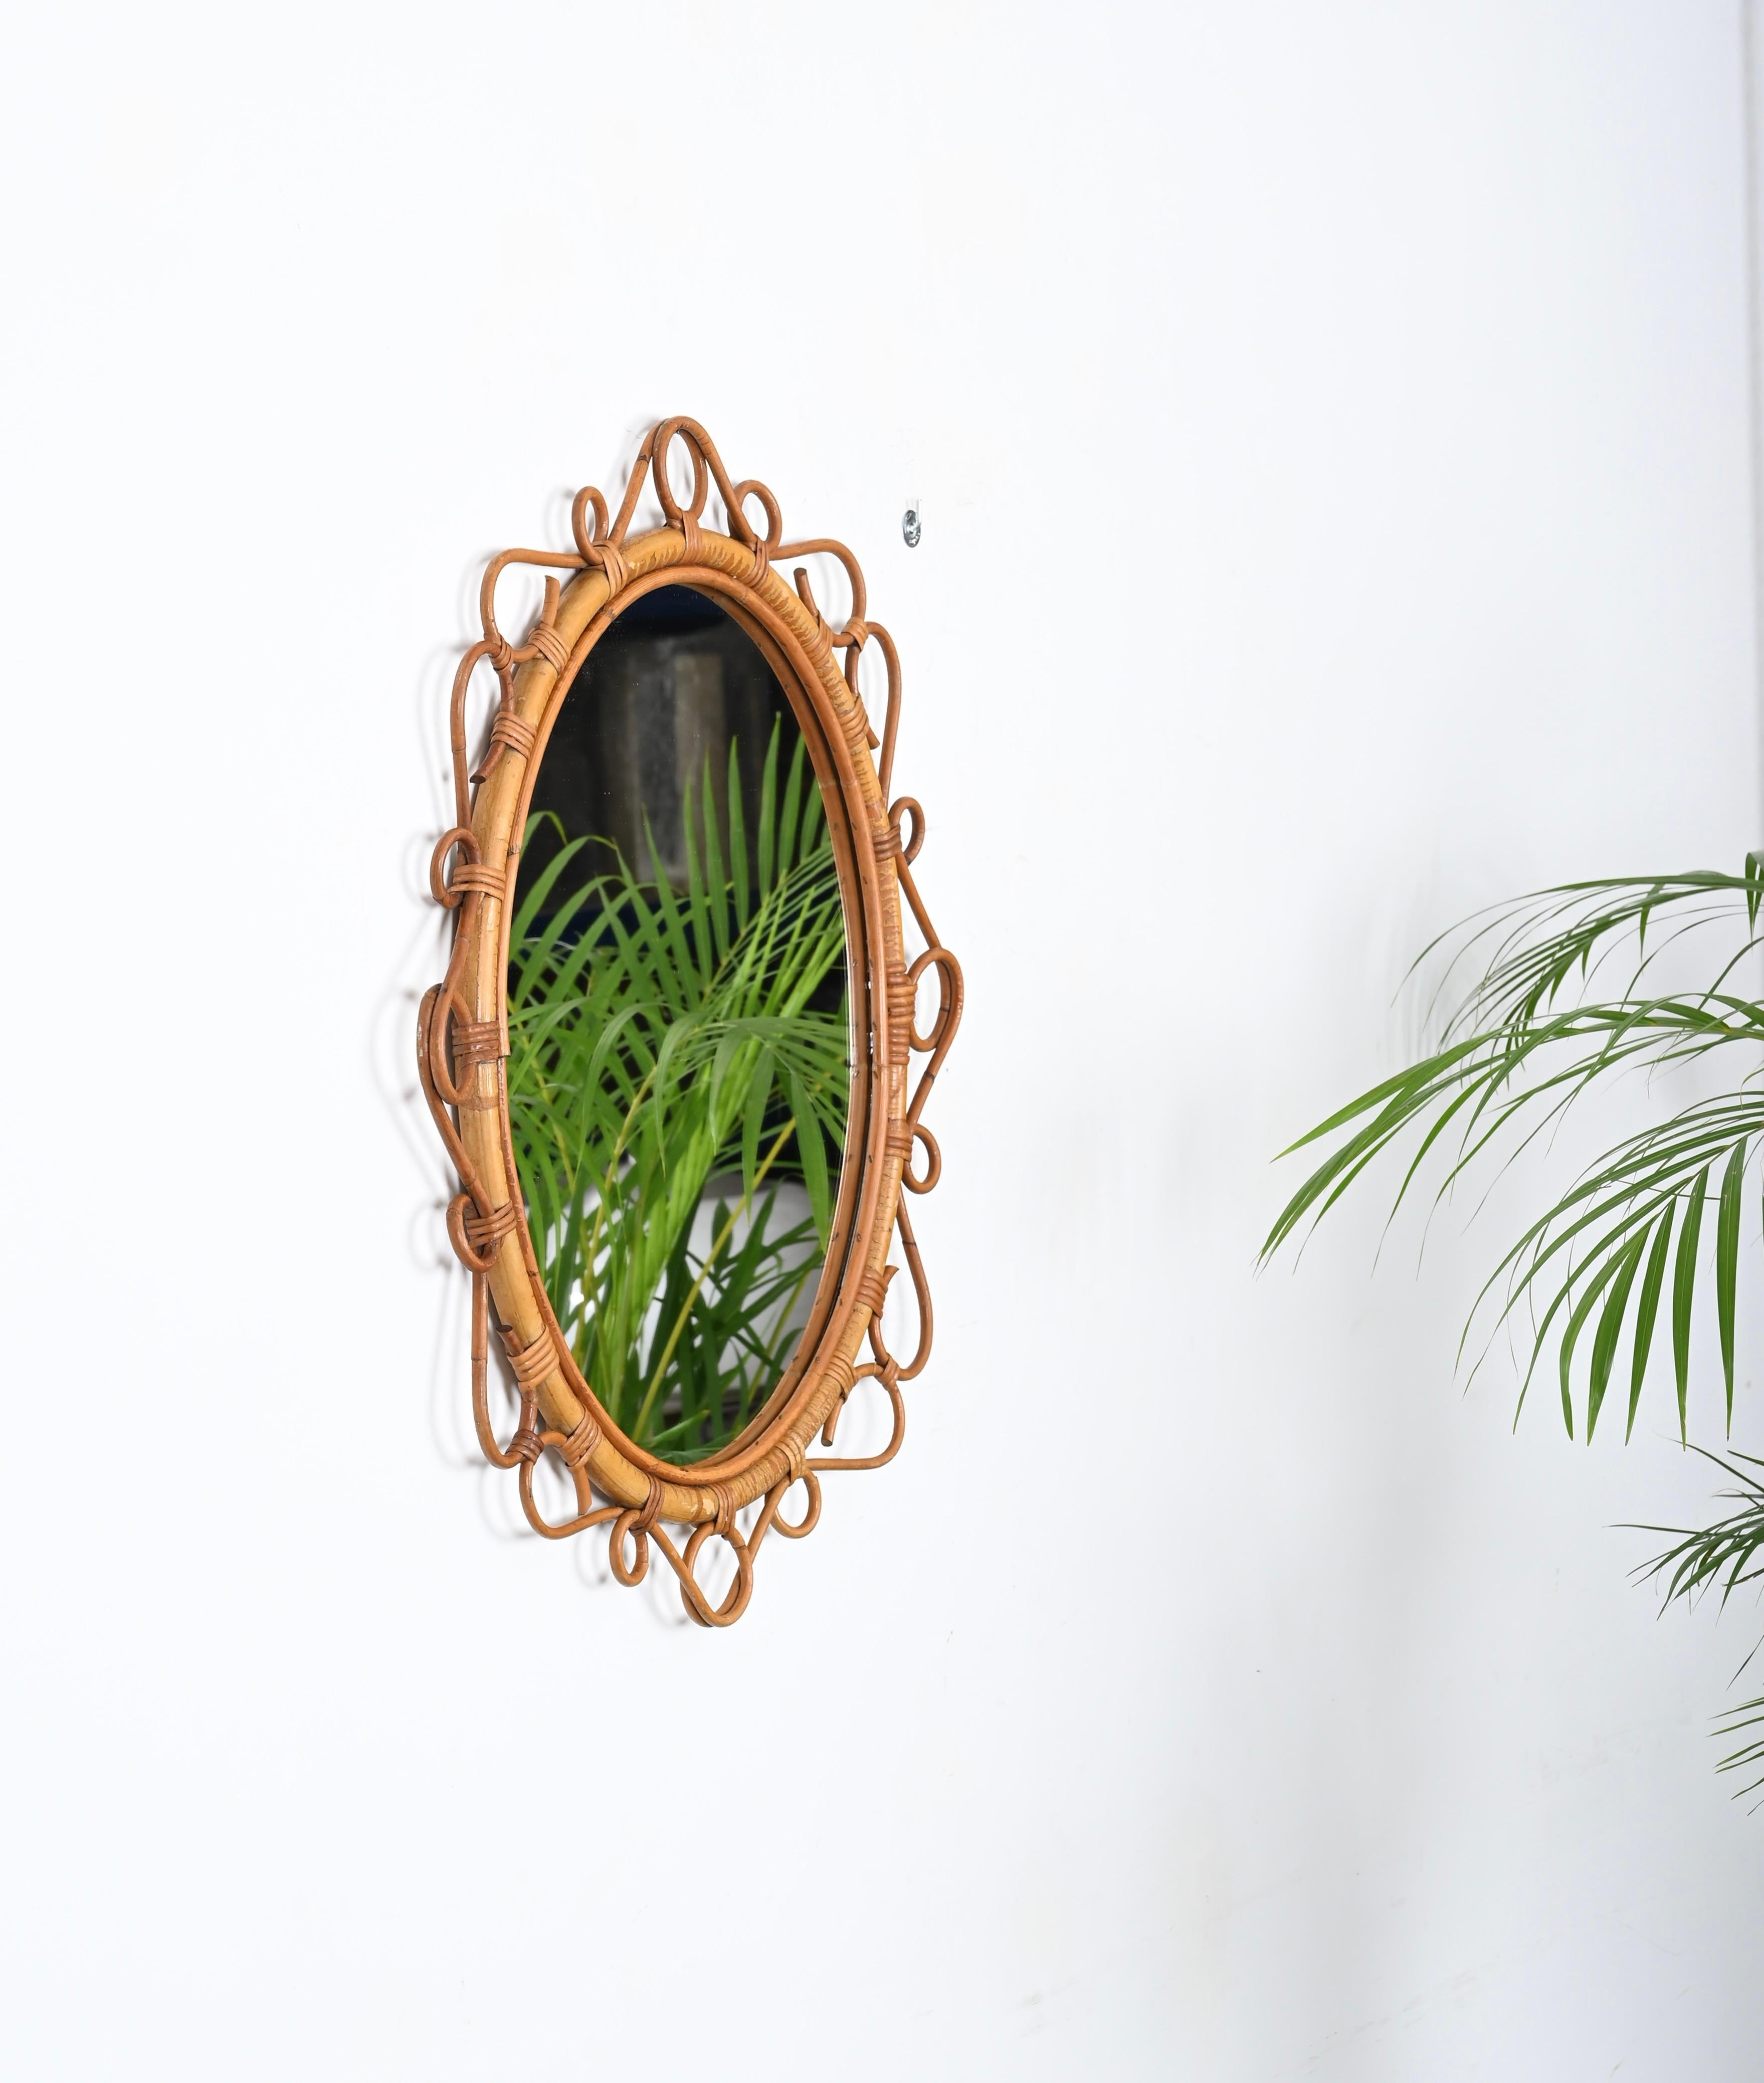 Italian French Riviera Oval Mirror in Rattan, Bamboo and Wicker, Italy 1970s